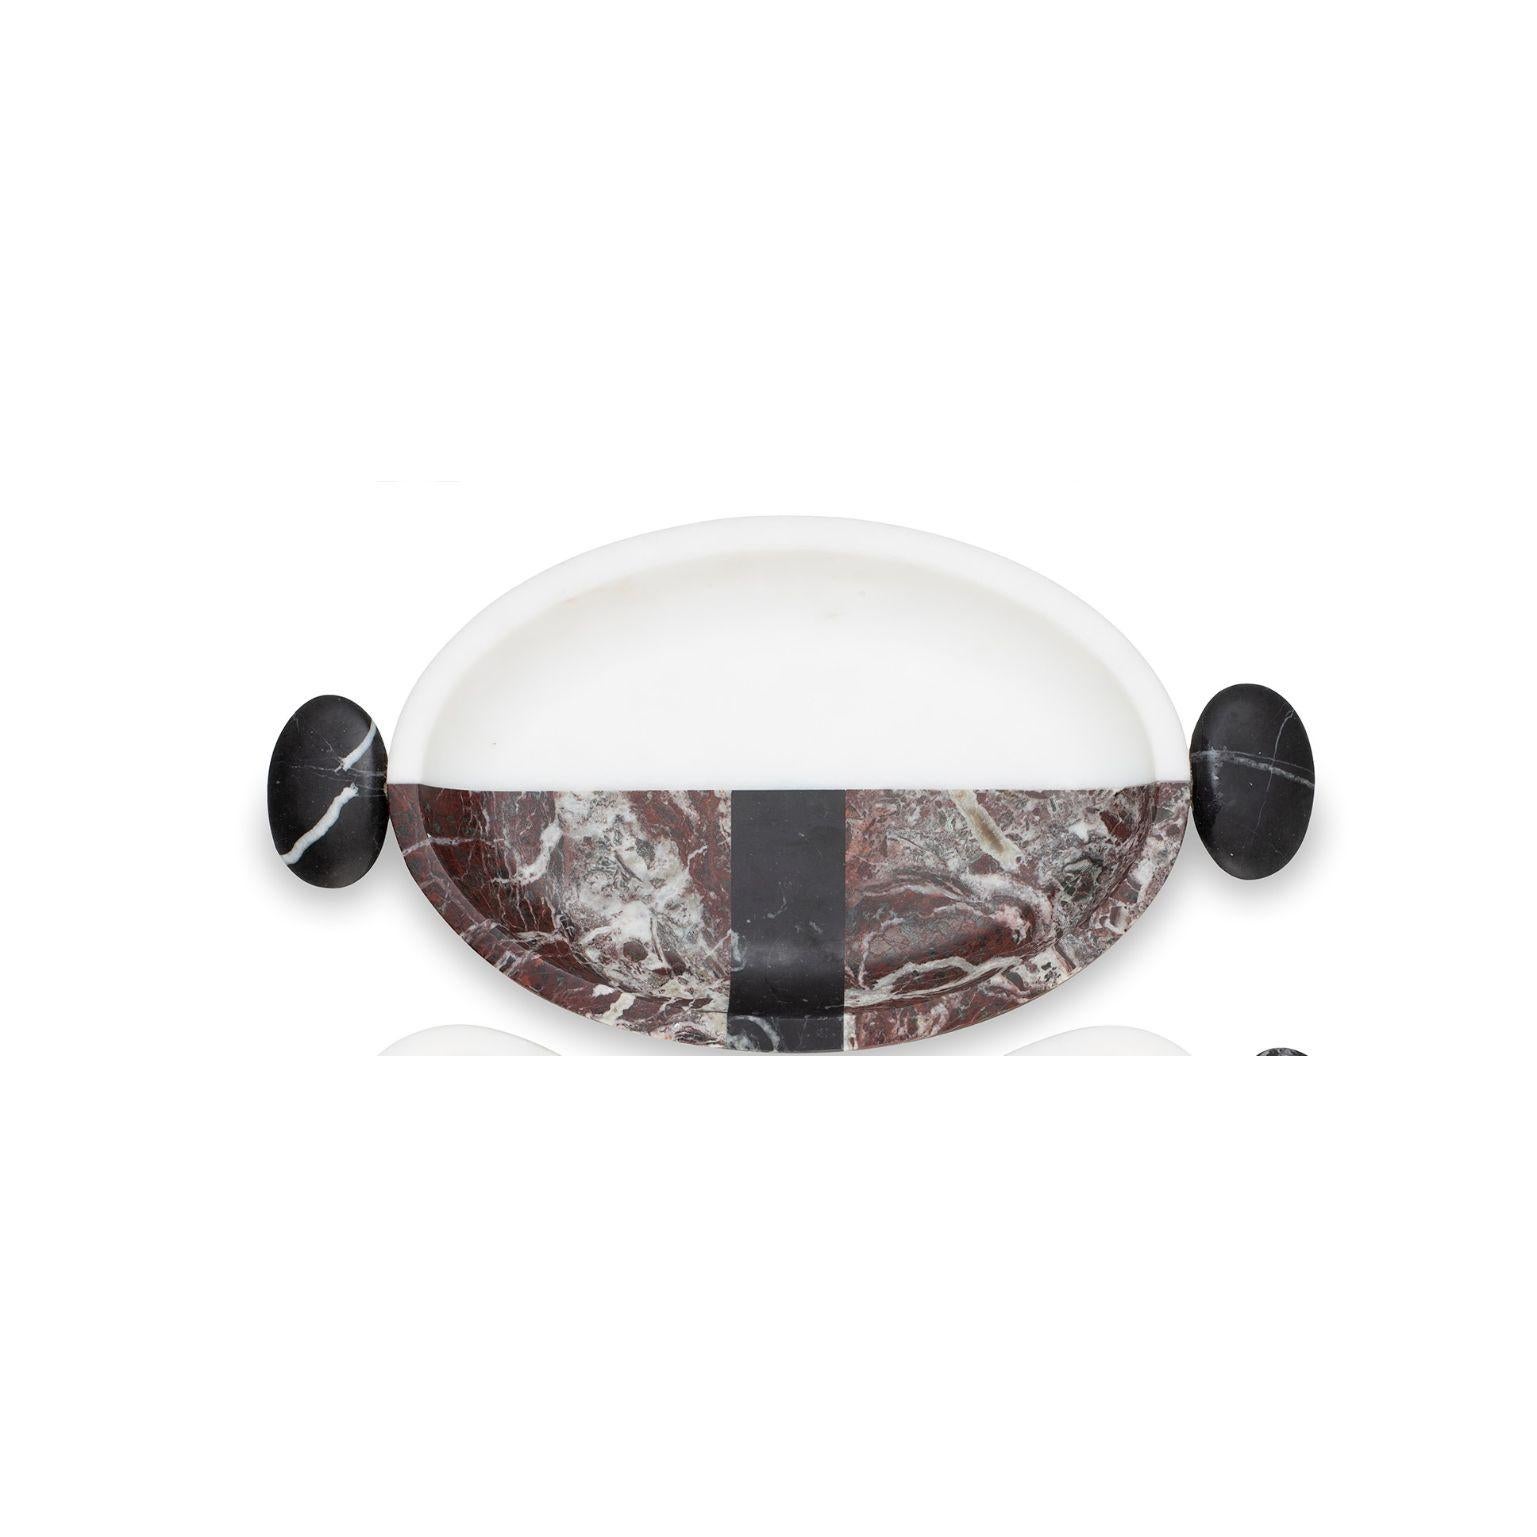 Carlo small plate by Matteo Cibic
Dimensions: 40 x 29 x 4 cm
Materials: Nero Marquinia, Bianco Michelangelo, Rosso Levanto

Please note that the Cibic pieces with “ears” or tray handles are ornamental and not functional. 
Use them can cause